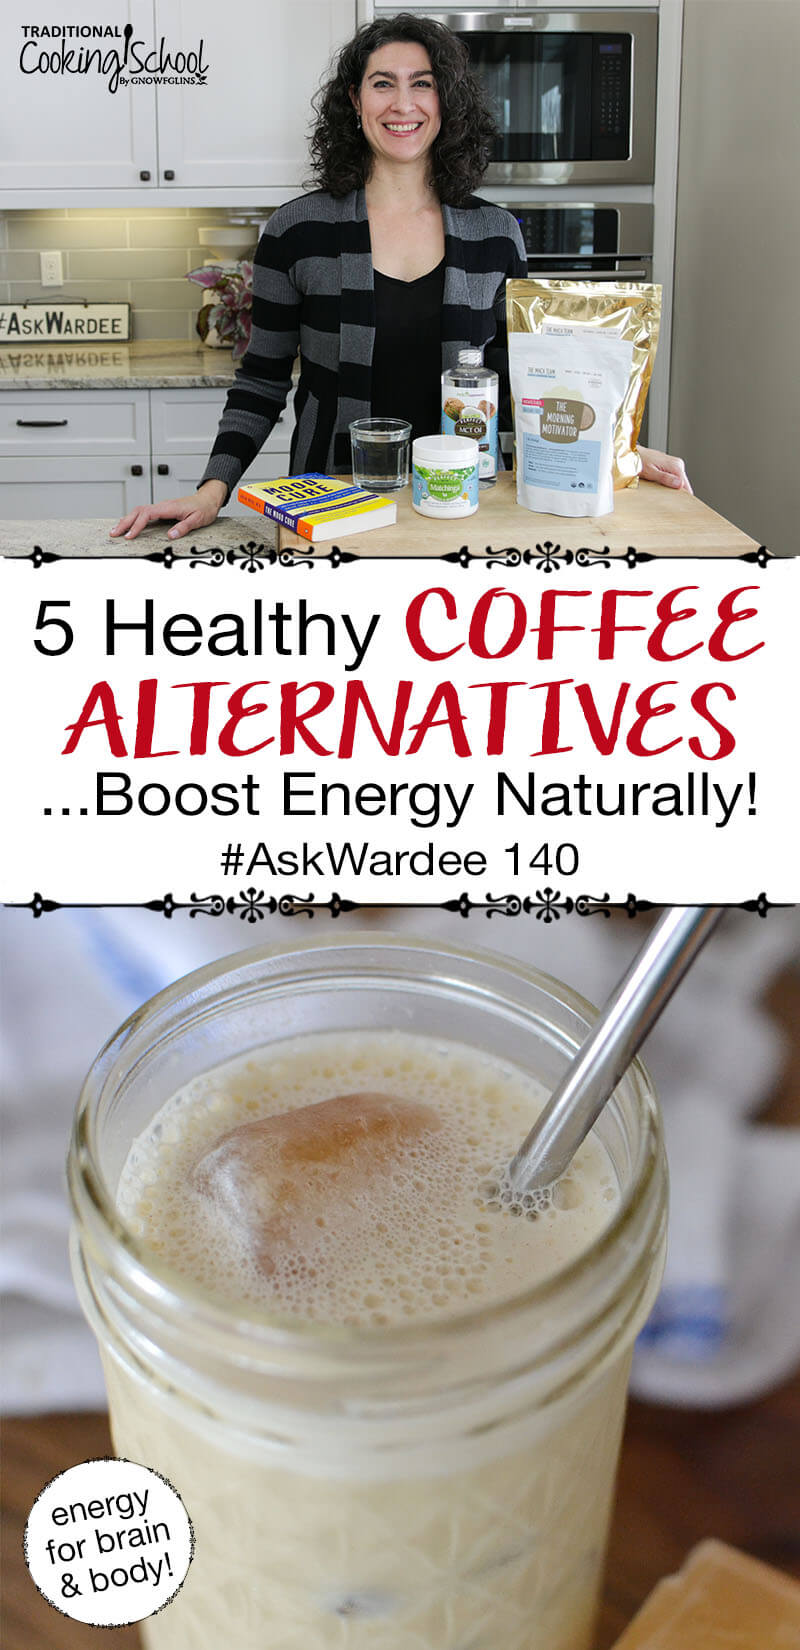 photo collage of smiling woman standing in a kitchen and a vanilla maca cooler, with text overlay: "5 Healthy Coffee Alternatives...Boost Energy Naturally! #AskWardee 140 (energy for brain & body!)"